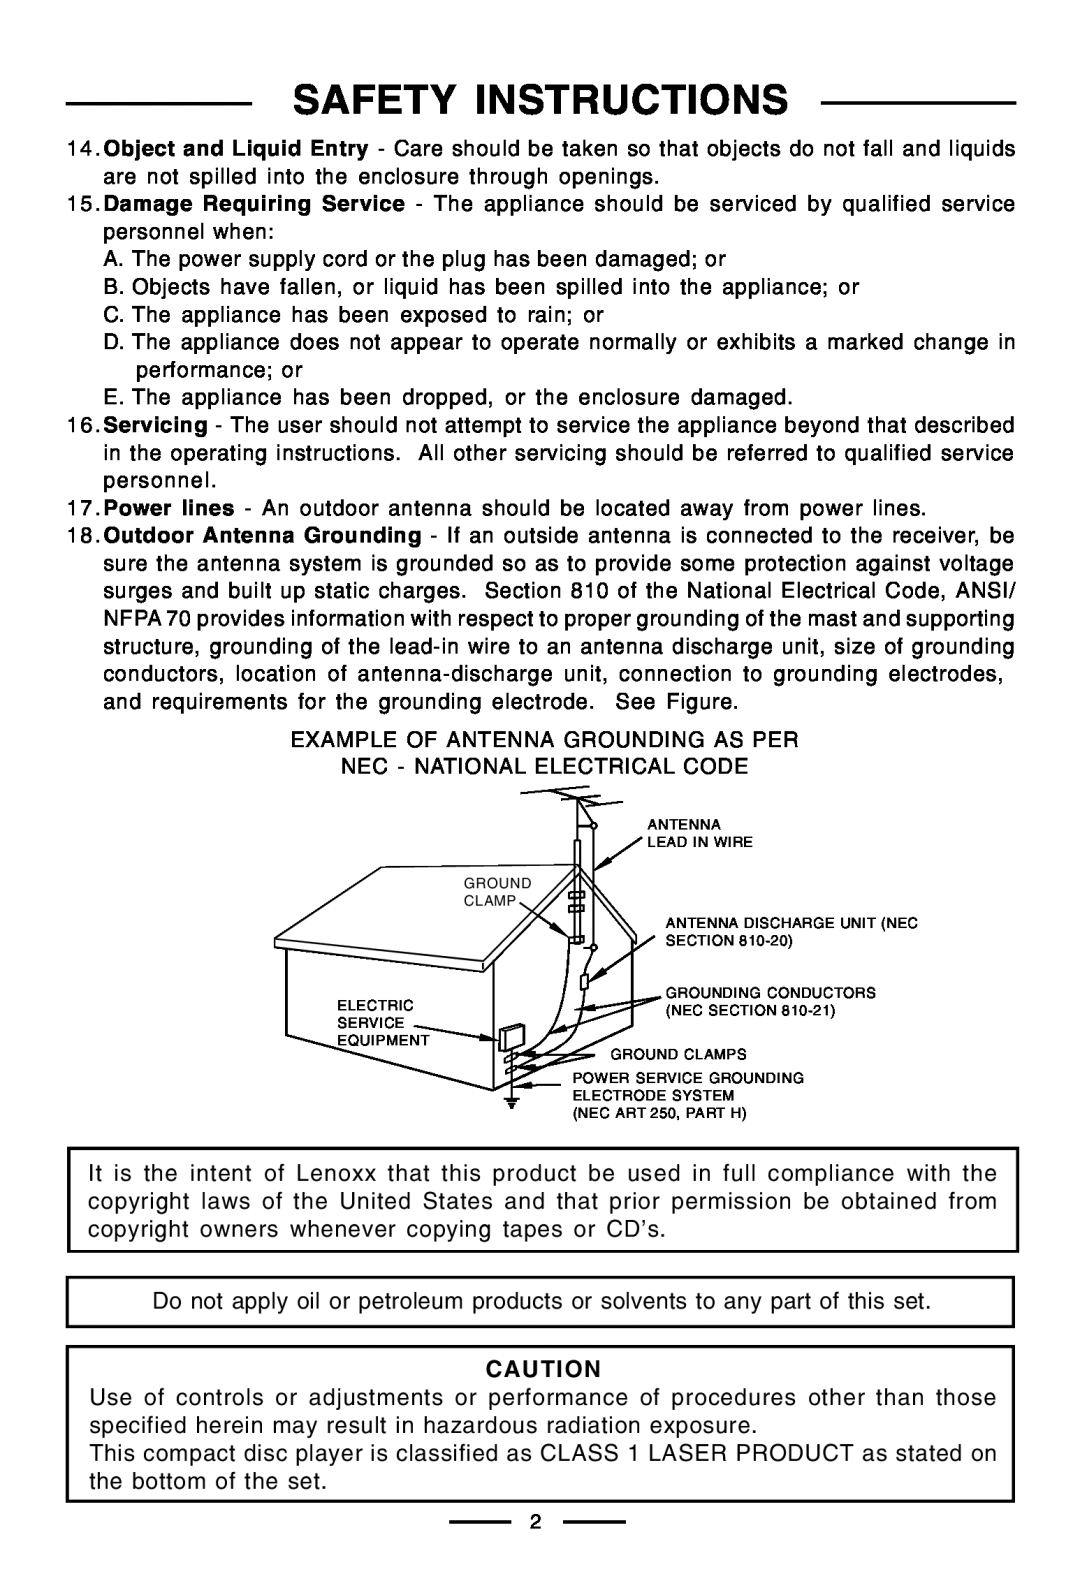 Lenoxx Electronics CD-210 manual Safety Instructions, A. The power supply cord or the plug has been damaged or 